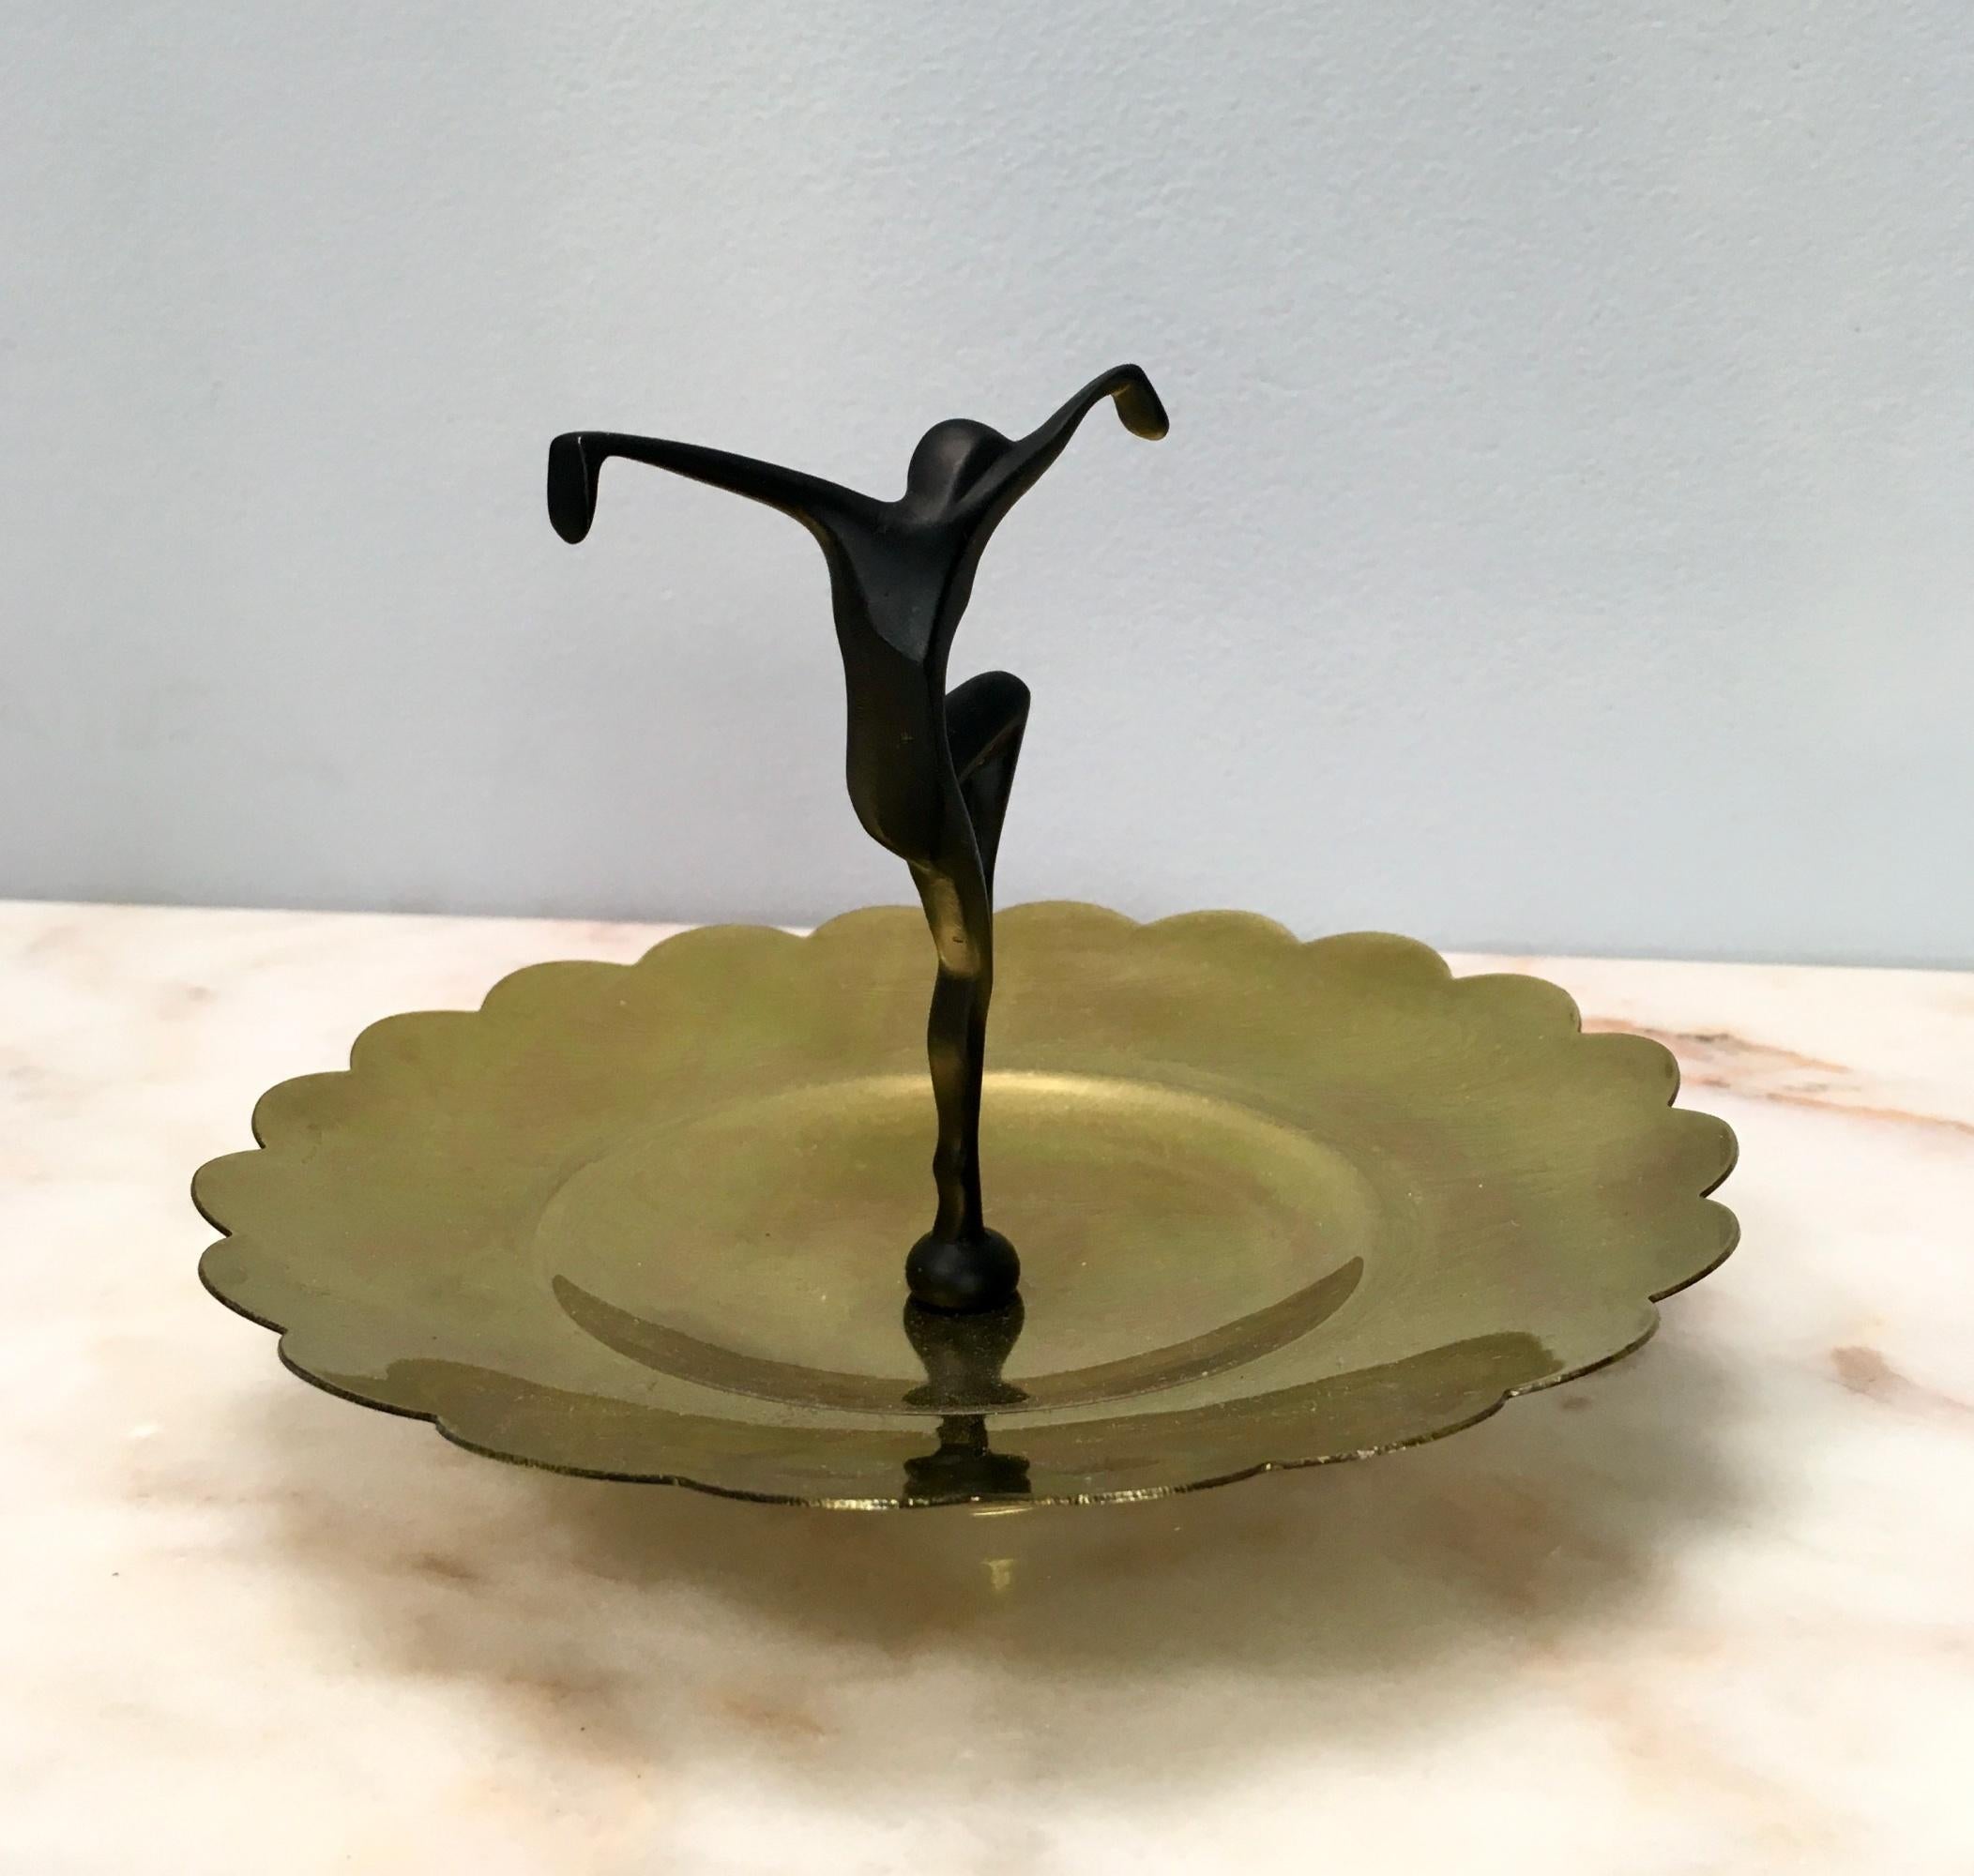 Varnished Vintage Brass and Metal Decorative Item / Vide-Poche with Dancing Figure, Italy